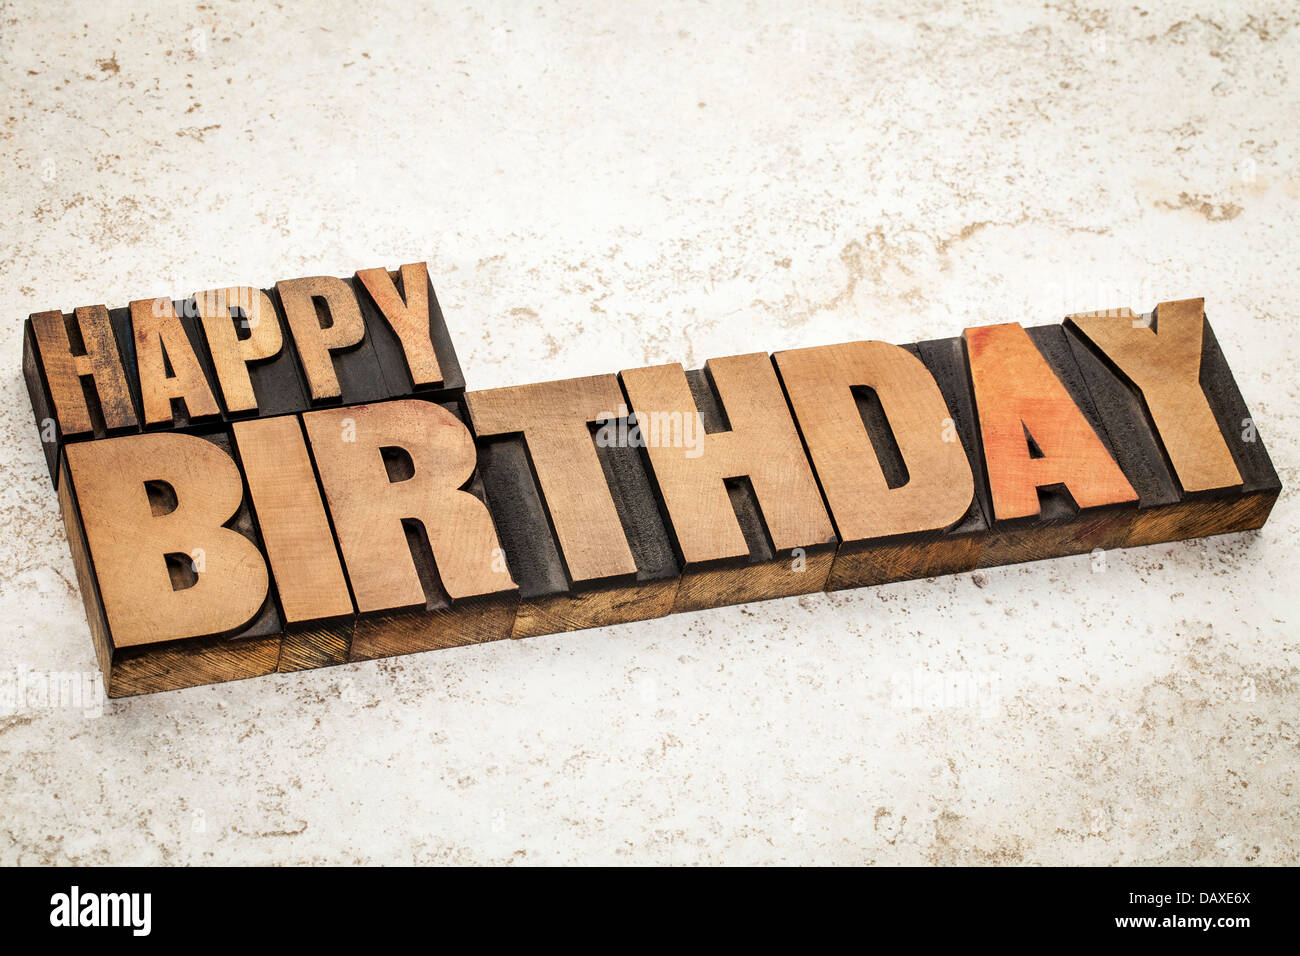 happy birthday text in vintage letterpress wood type on a ceramic tile background Stock Photo